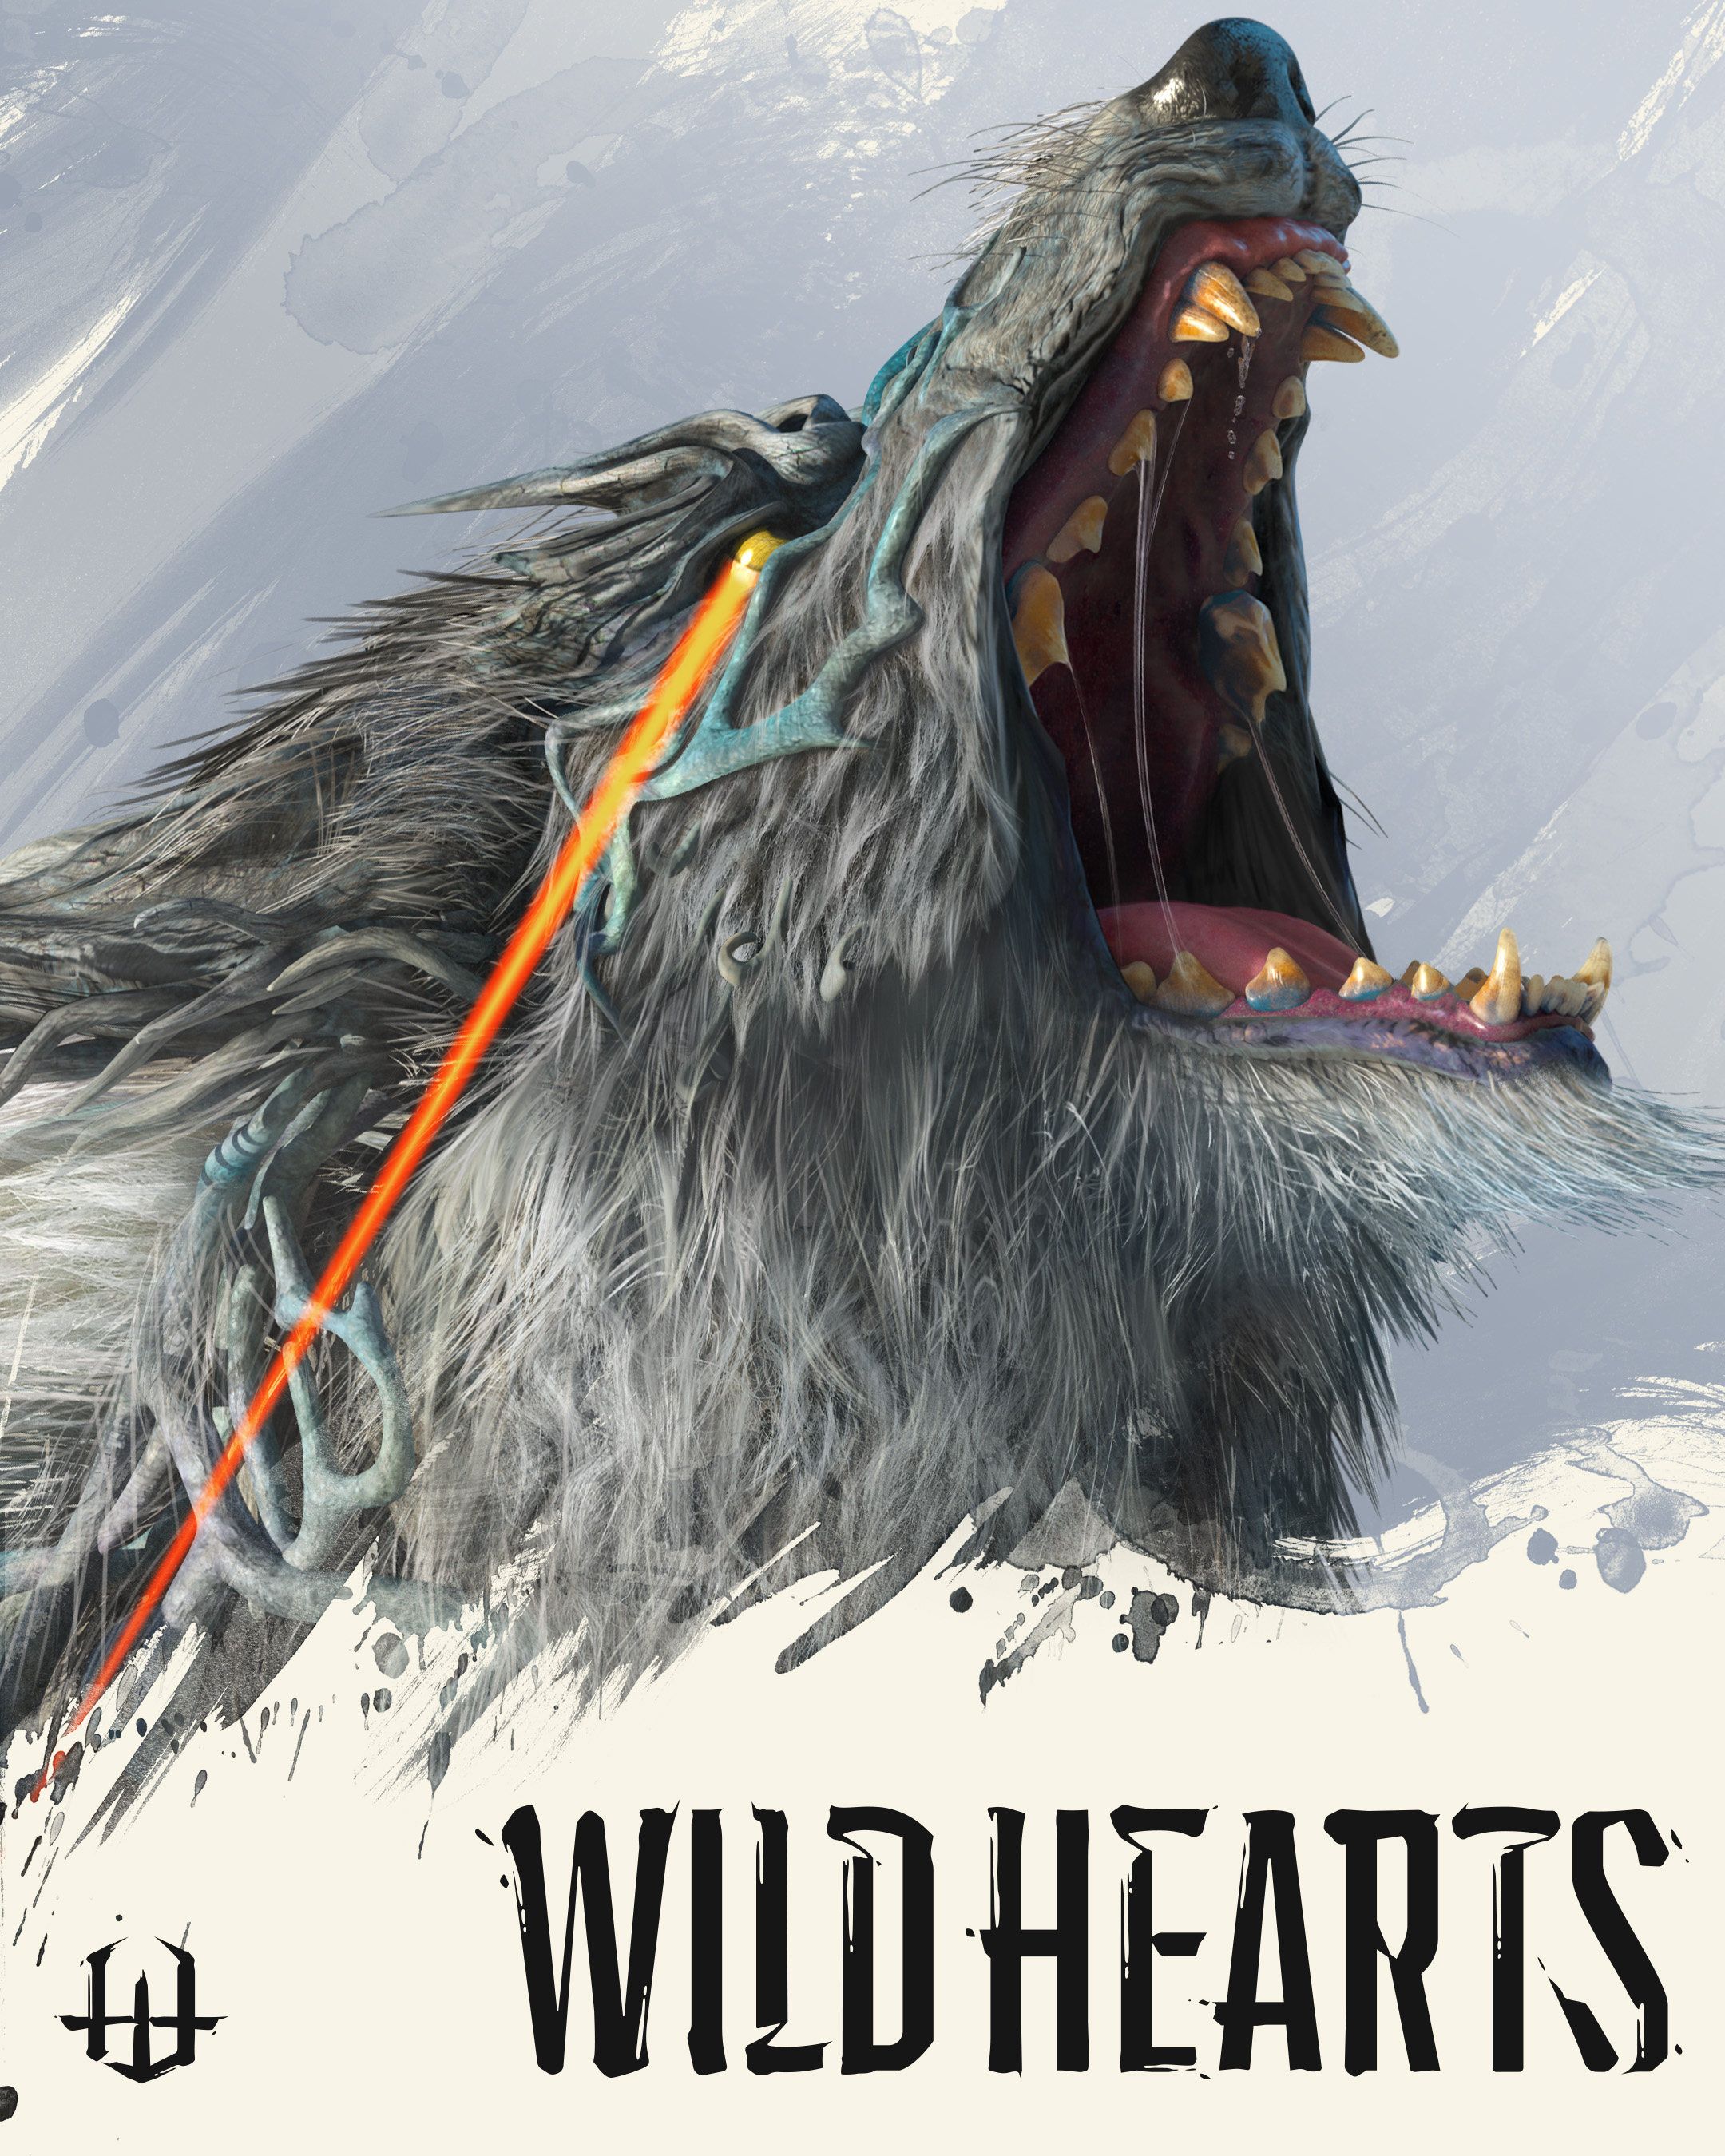 Upcoming Wild Hearts Update Trailer Revealed